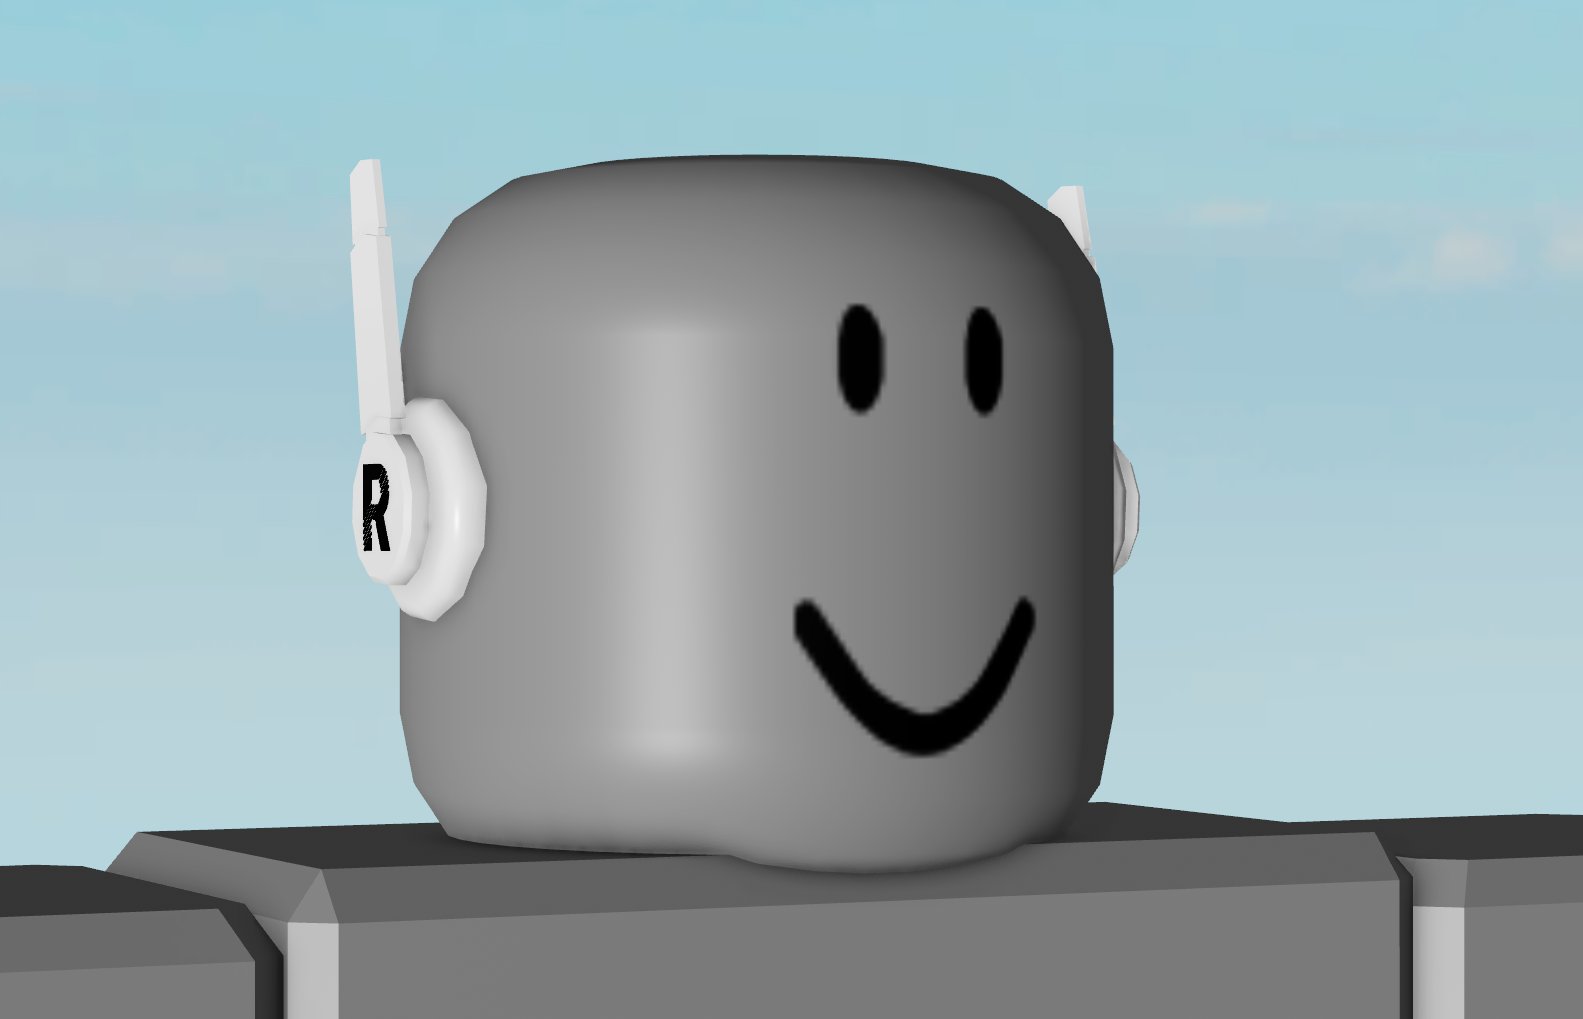 Schlep on X: roblox simulators are officially out of control